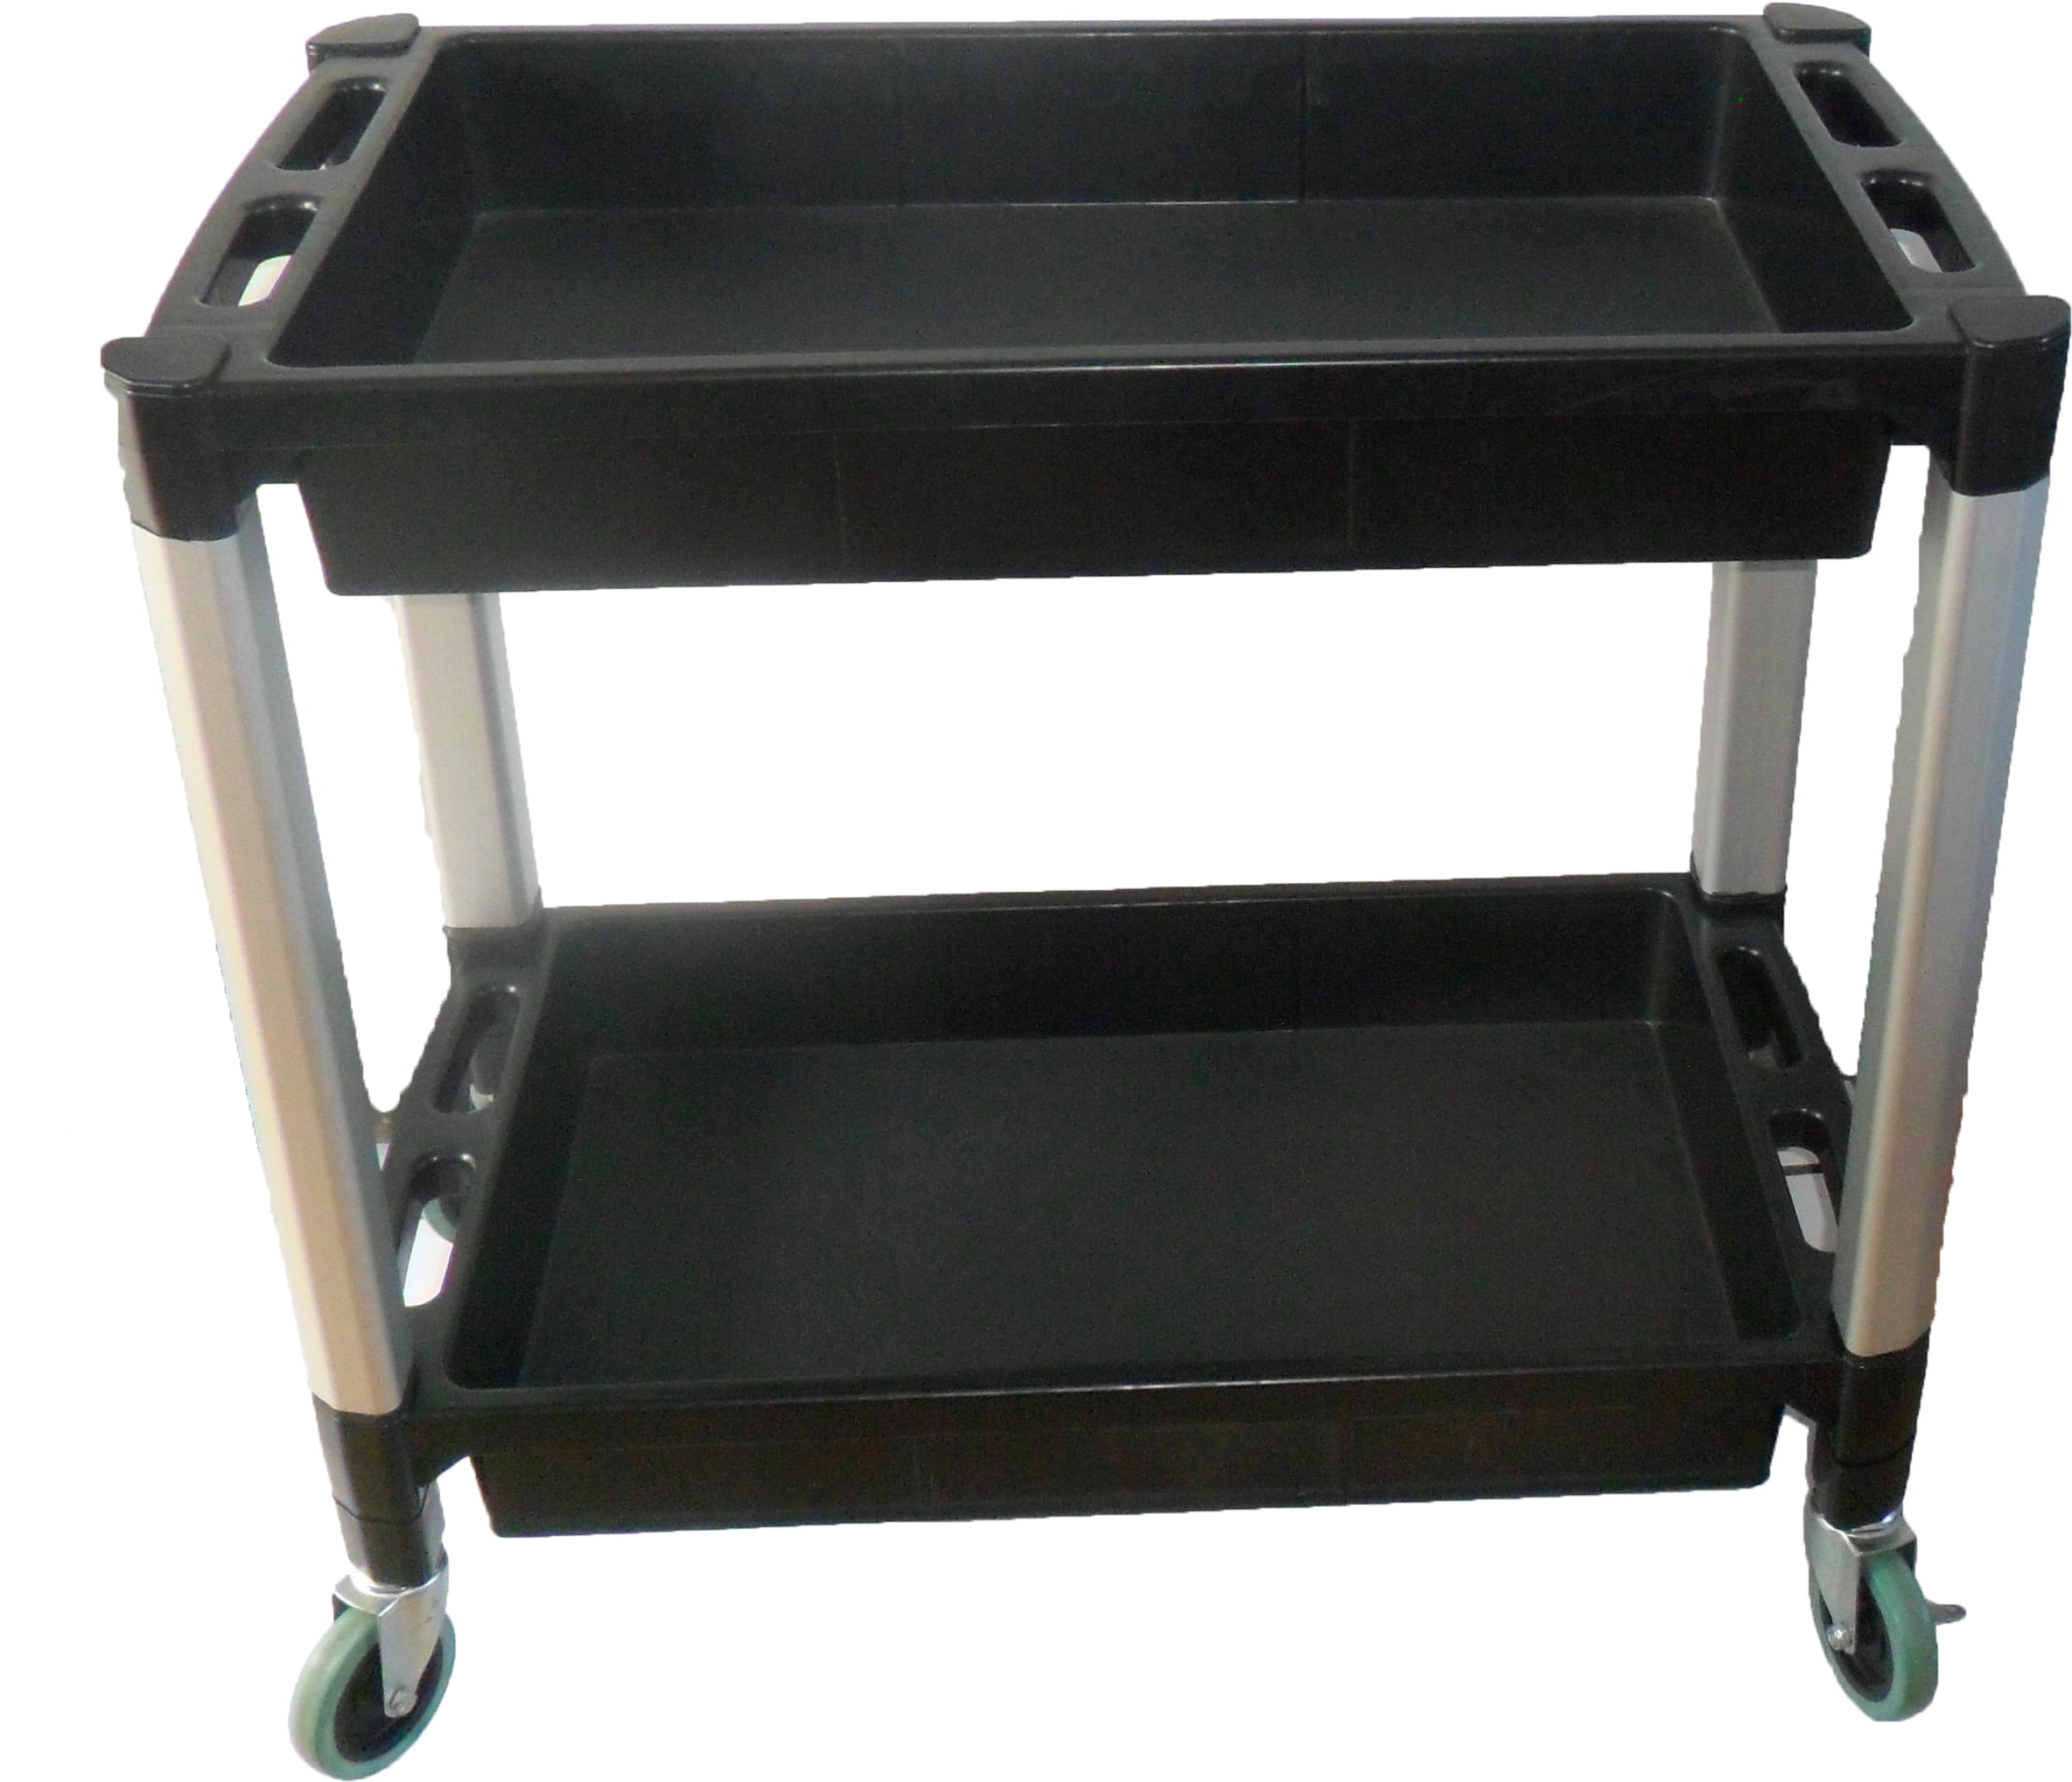 MaxWorks 80384 Black and Gray Two-Tray Service/Utility Cart With Aluminum Legs And 4 Diameter Swivel Castors 